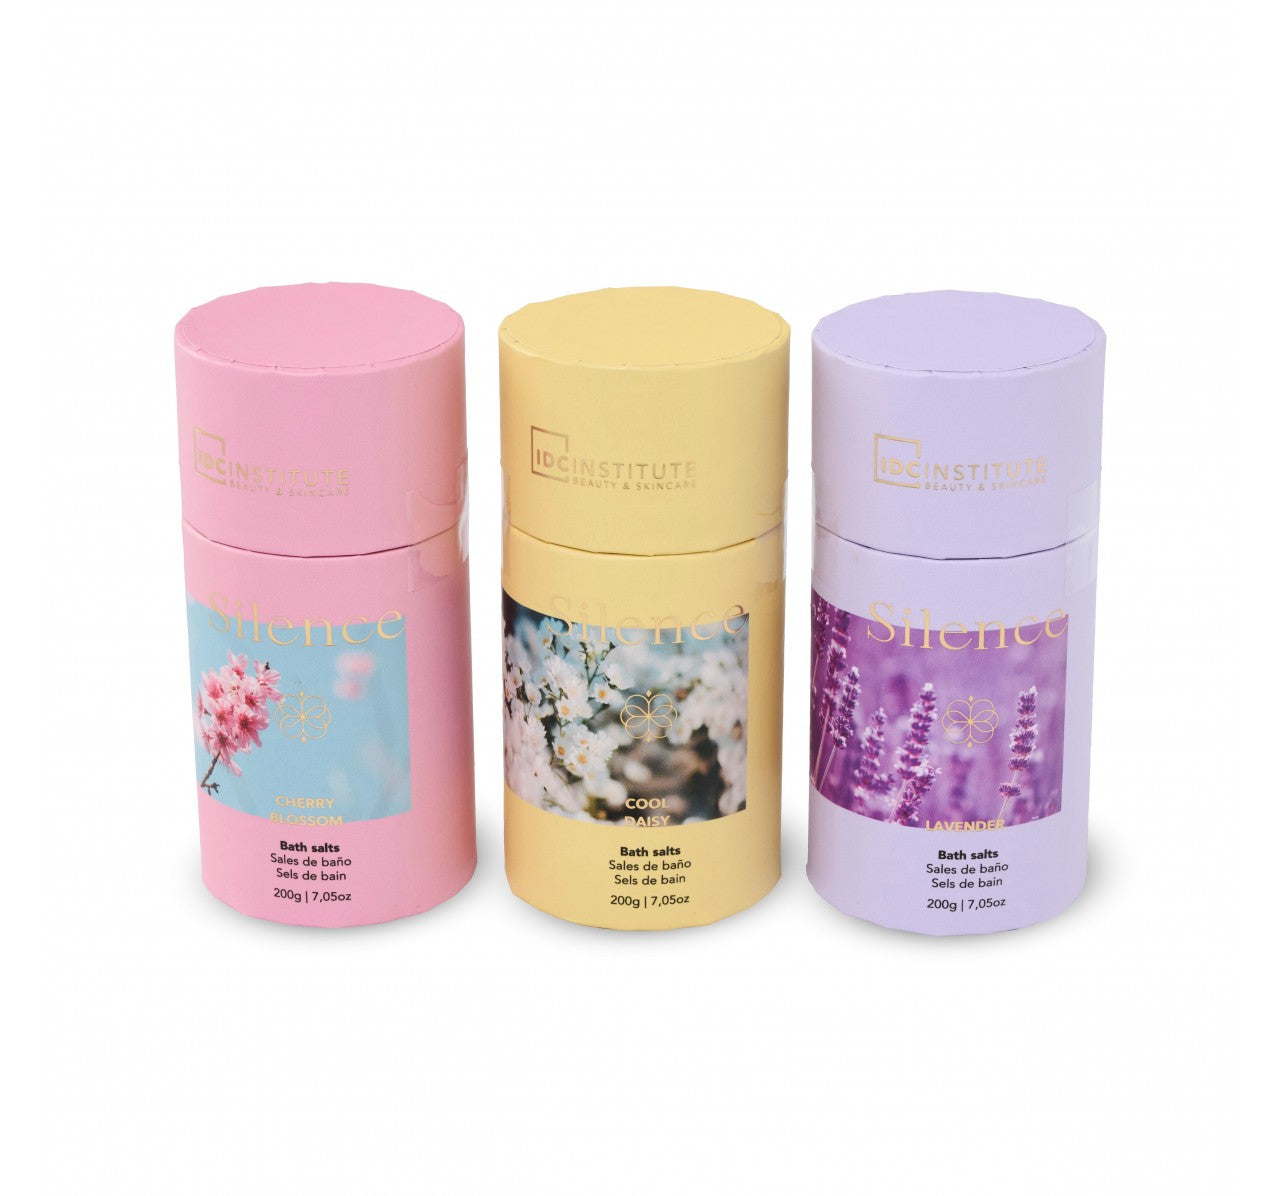 IDC Institute Silence Bath Salts Trio Gift Set For Her